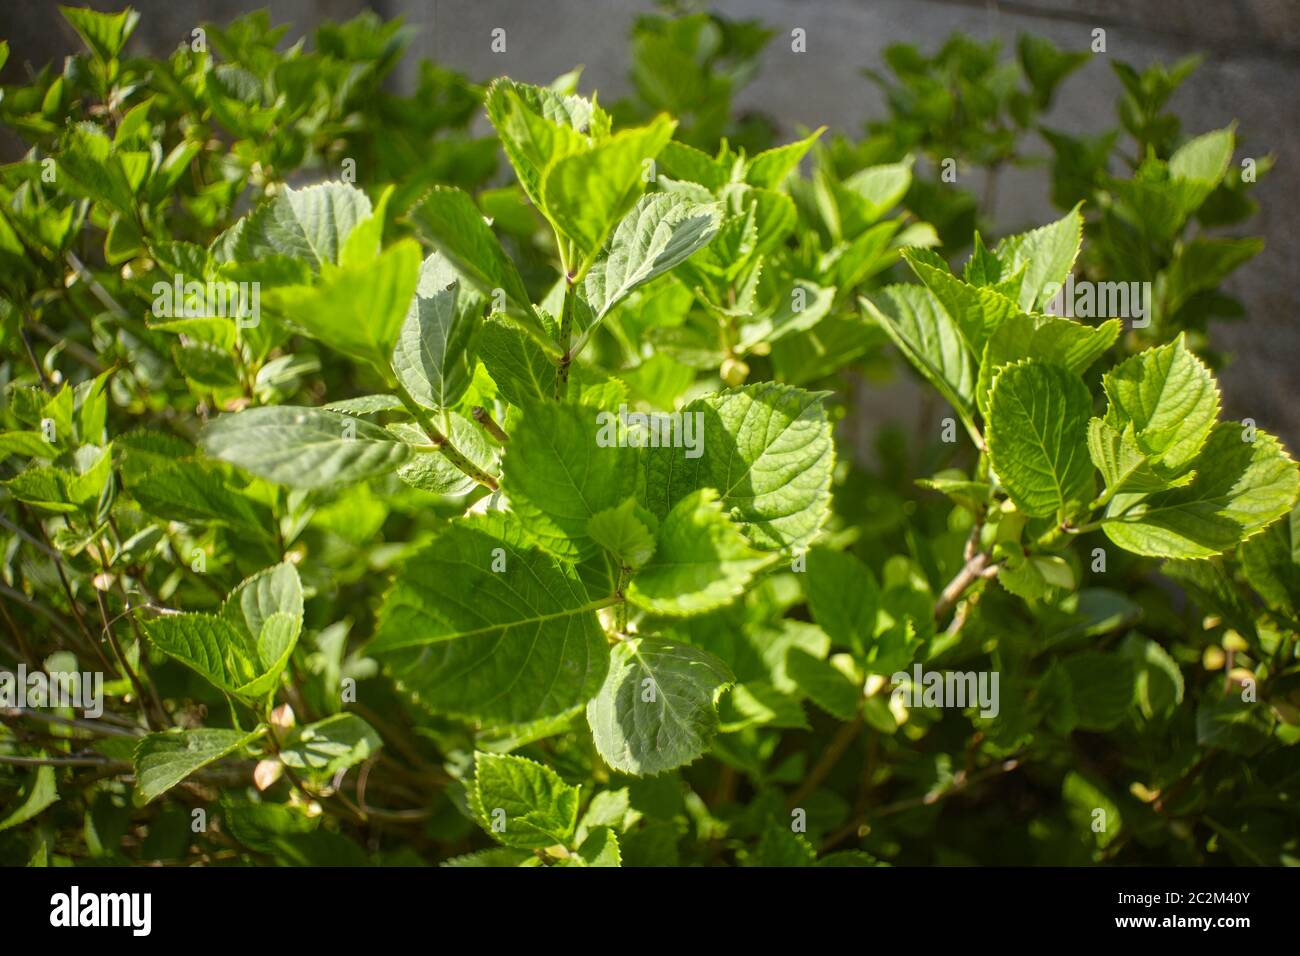 New leaves that are born in spring over a shrub used as an ornamental plant in a garden. The light green leaves start to grow and develop. Stock Photo